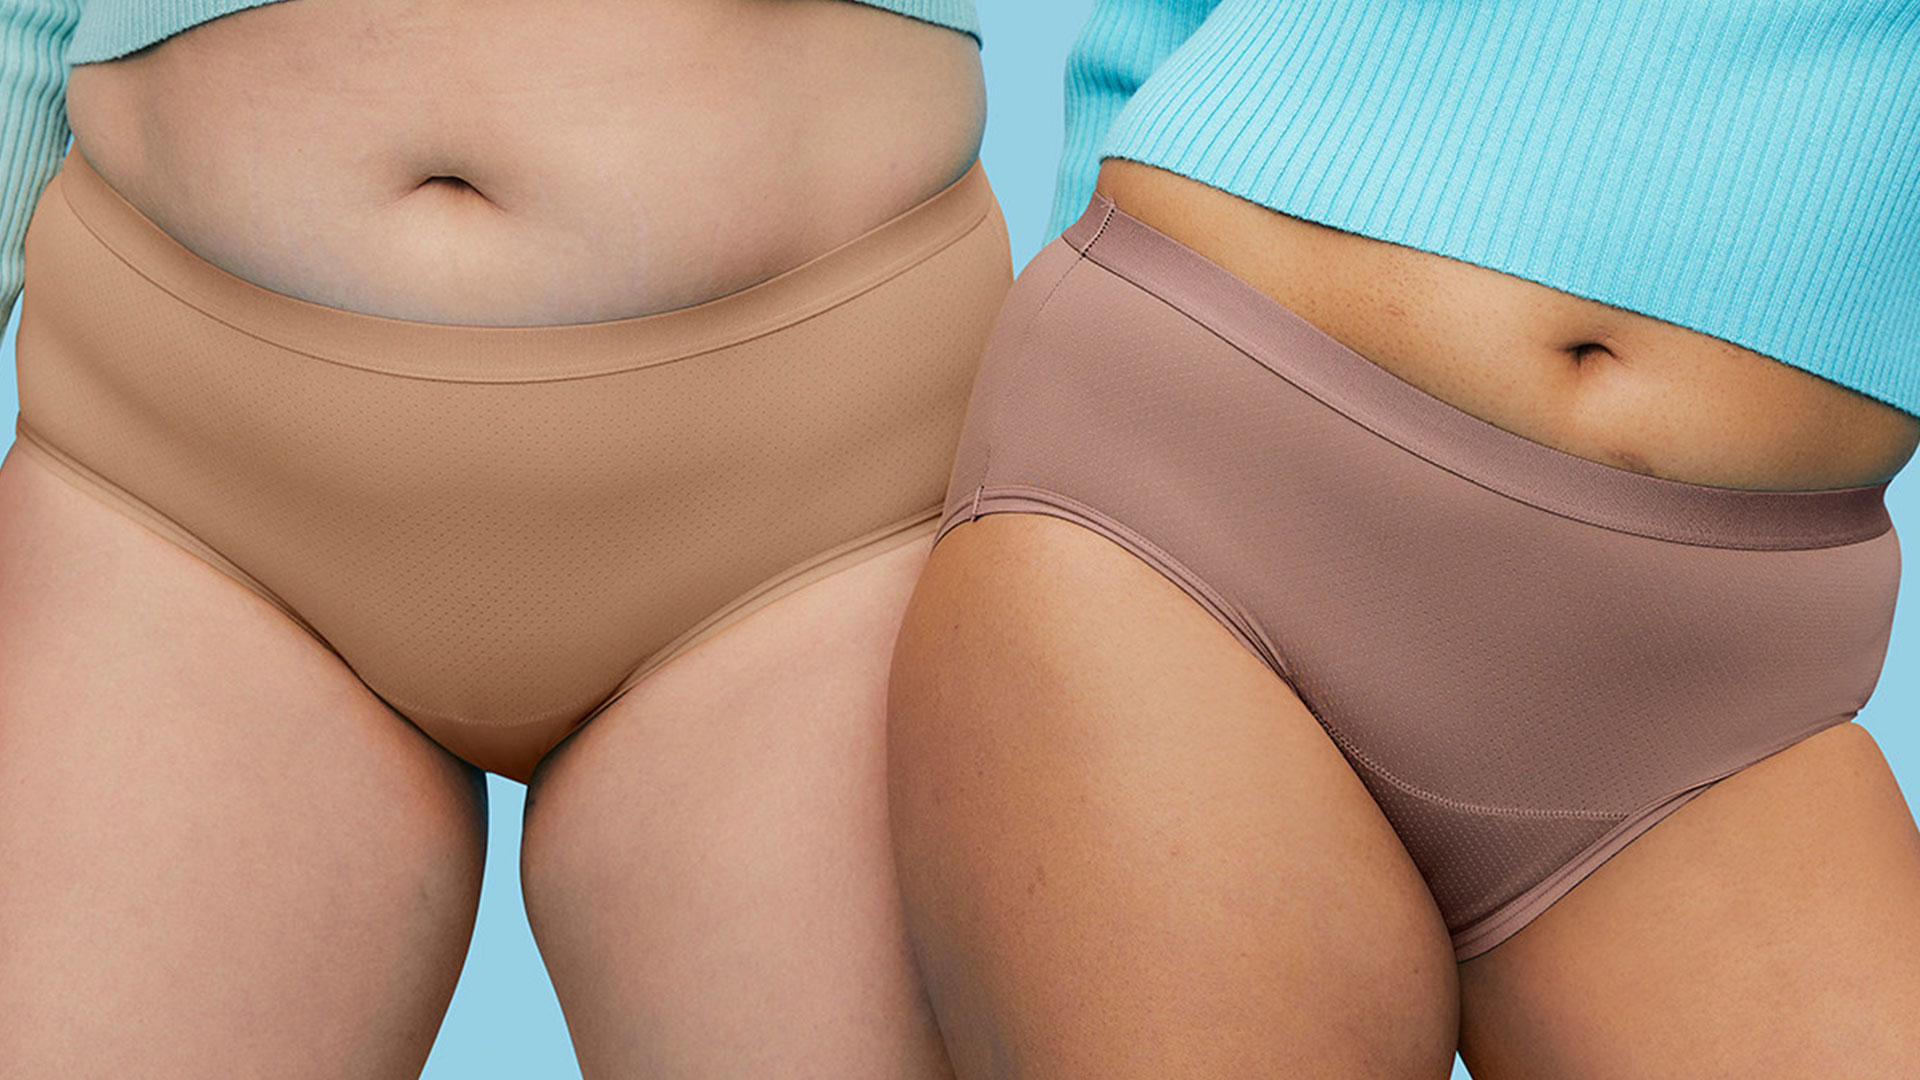 Thinx Underwear Settled A Class-Action Lawsuit: Here's What We Know